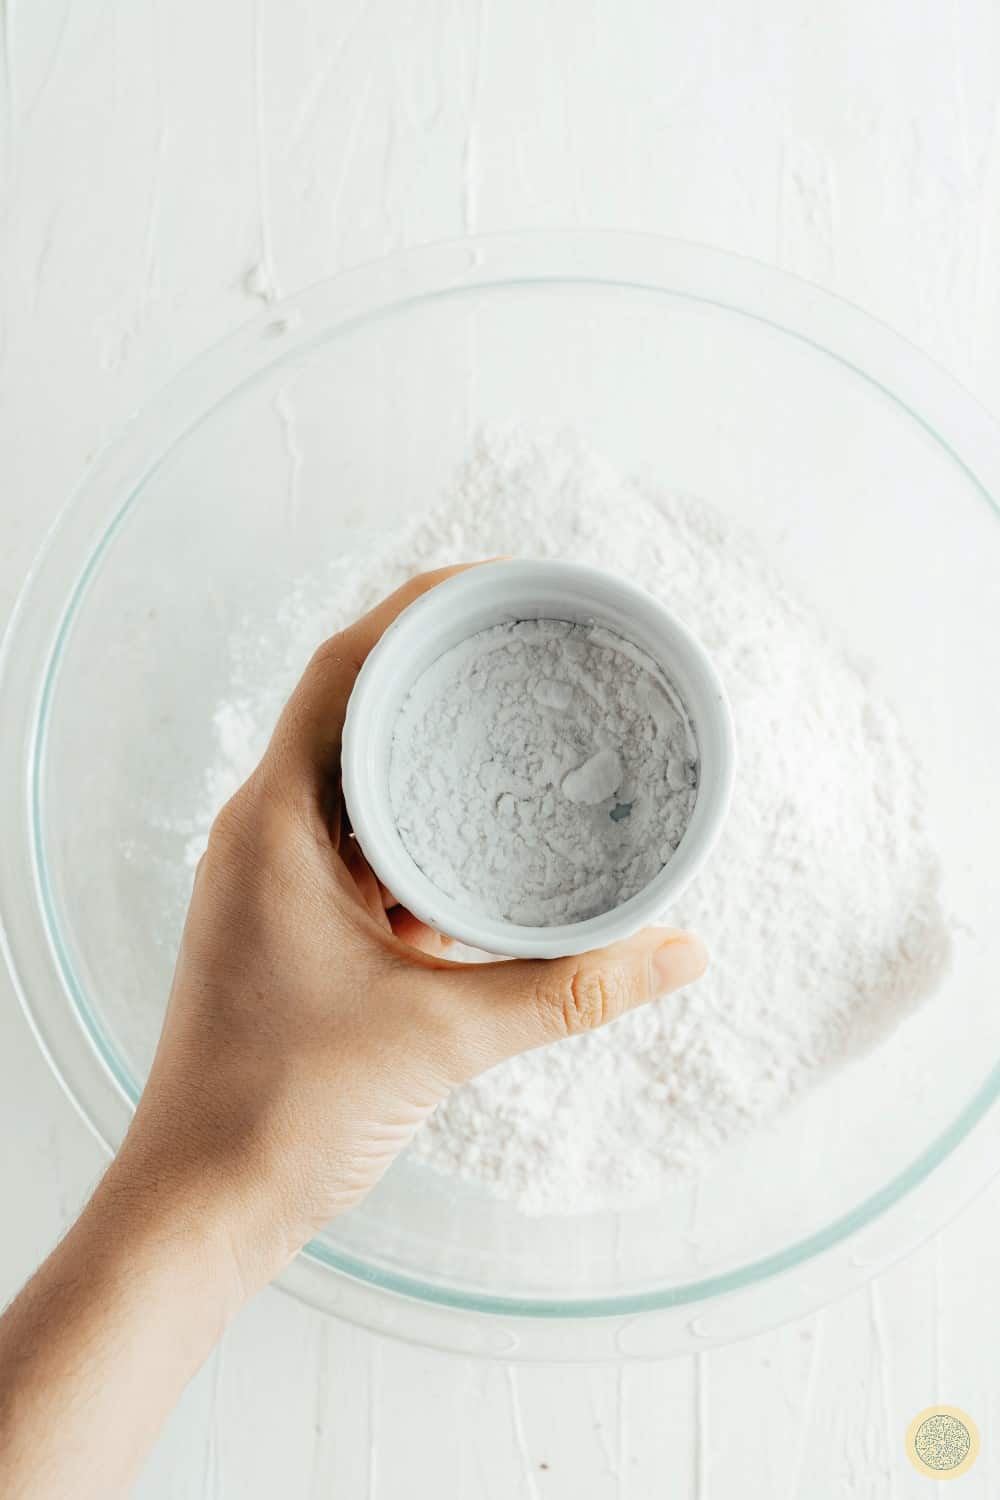 whisk together the flour, cinnamon